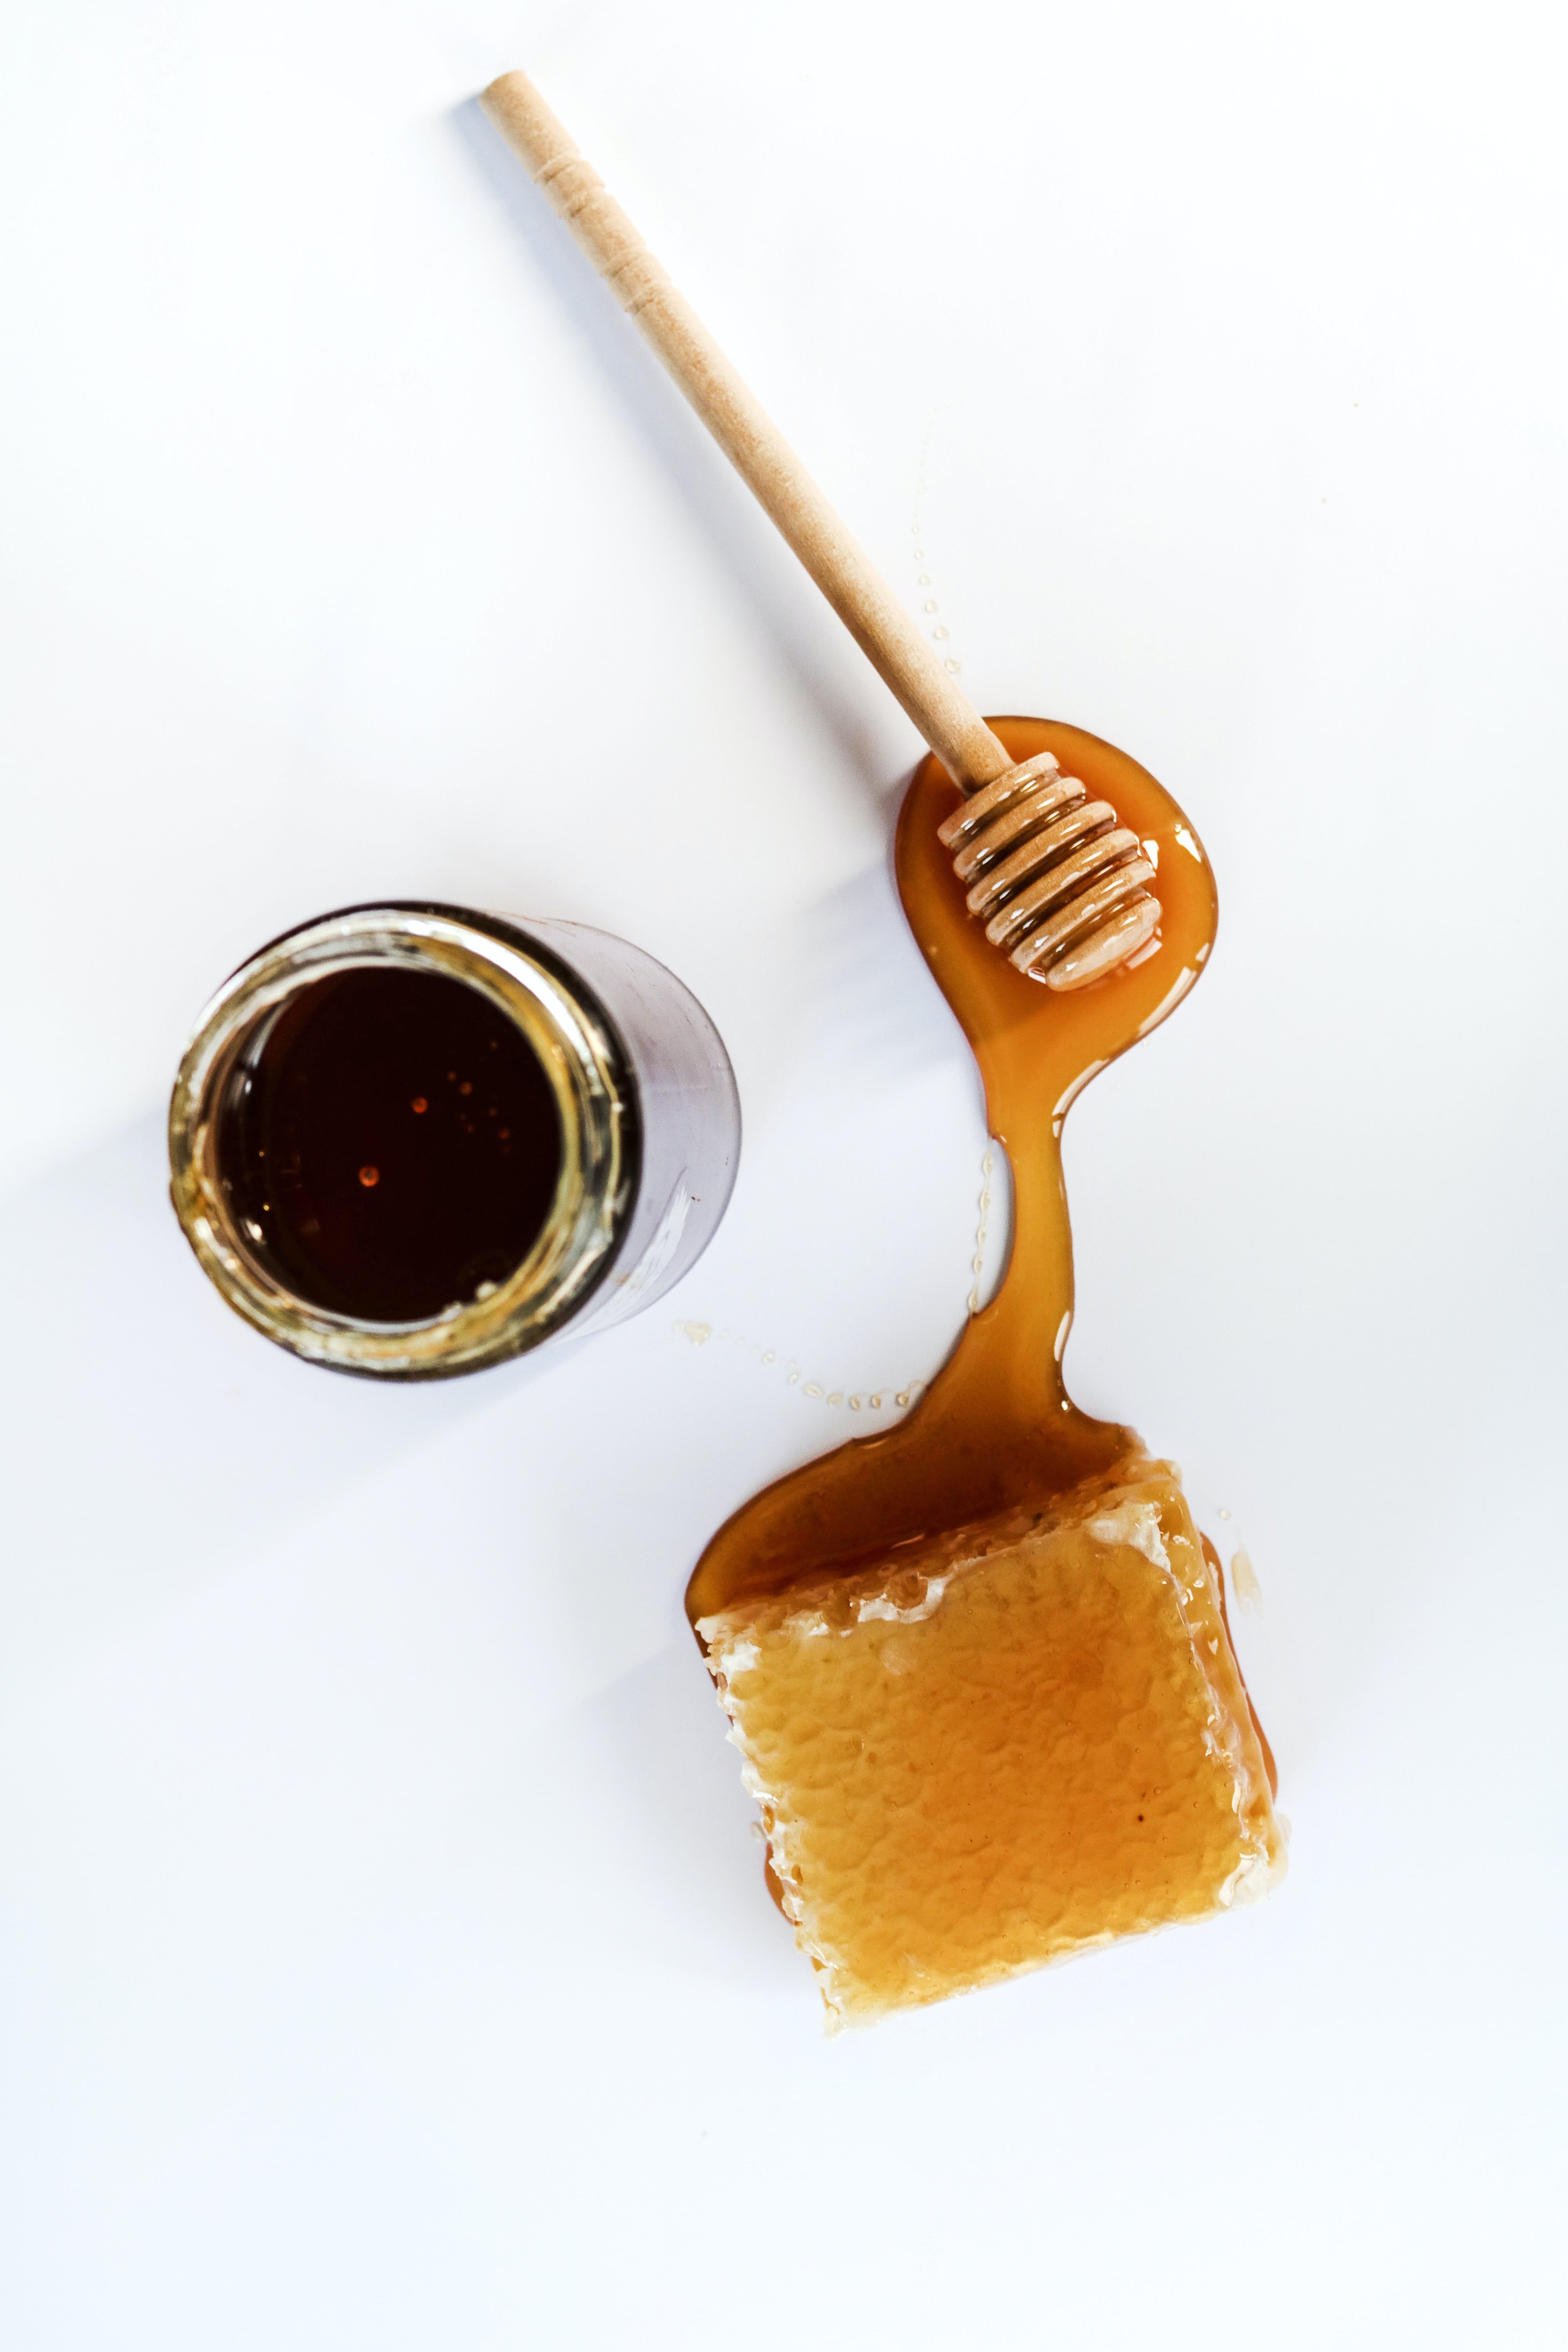 Health benefits of honey: Here's what's proven